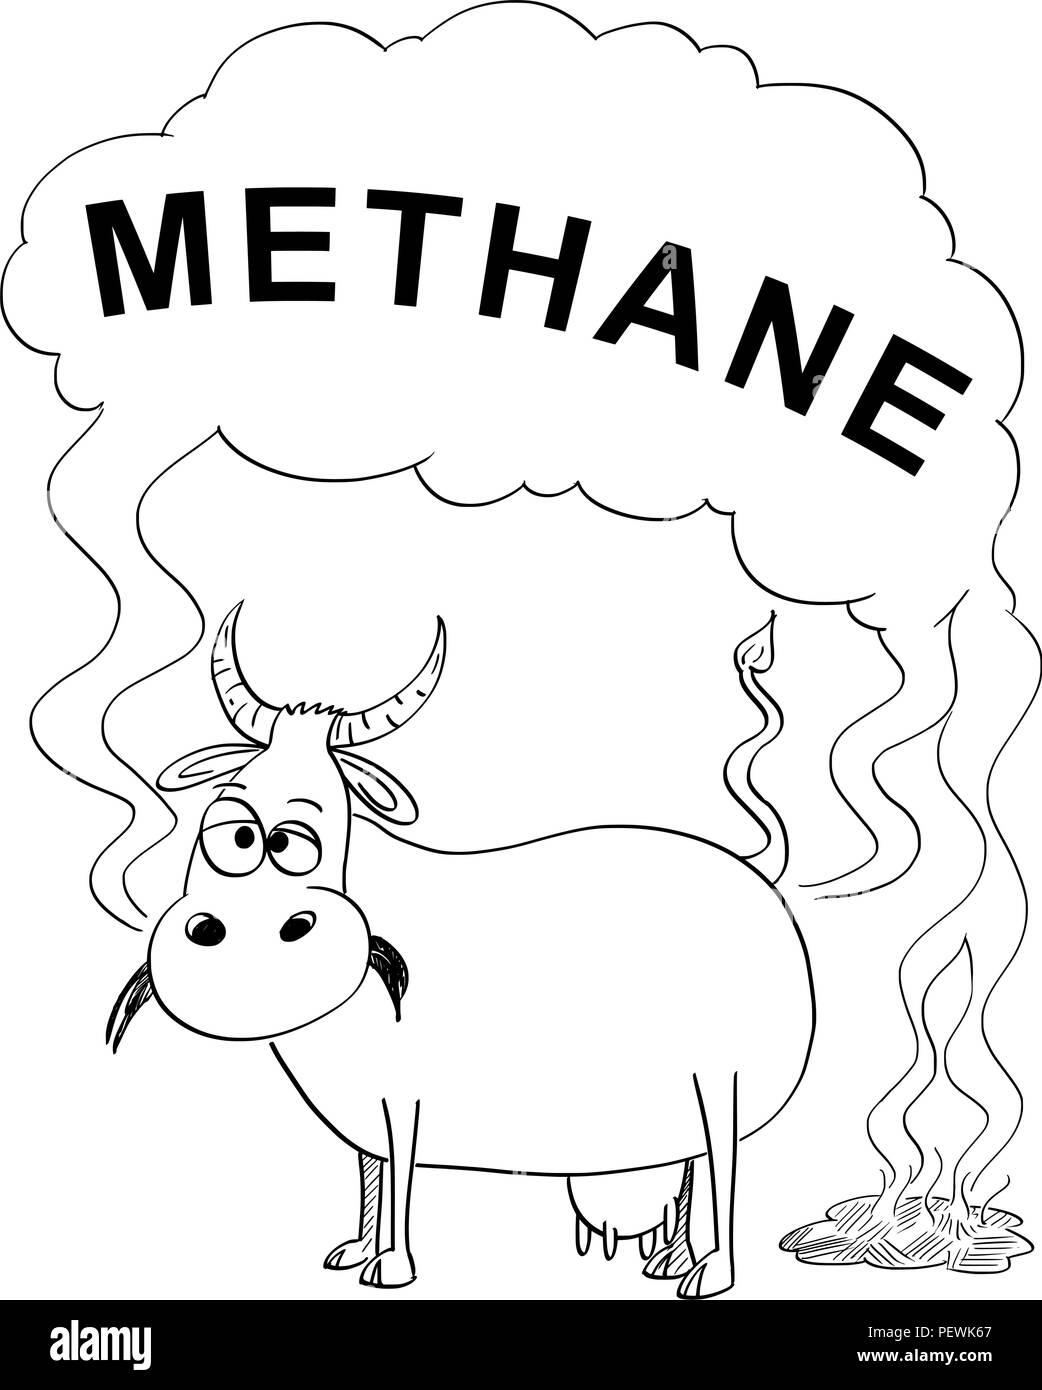 Vector Black and White Drawing or Illustration of Cow Producing Methane Stock Vector